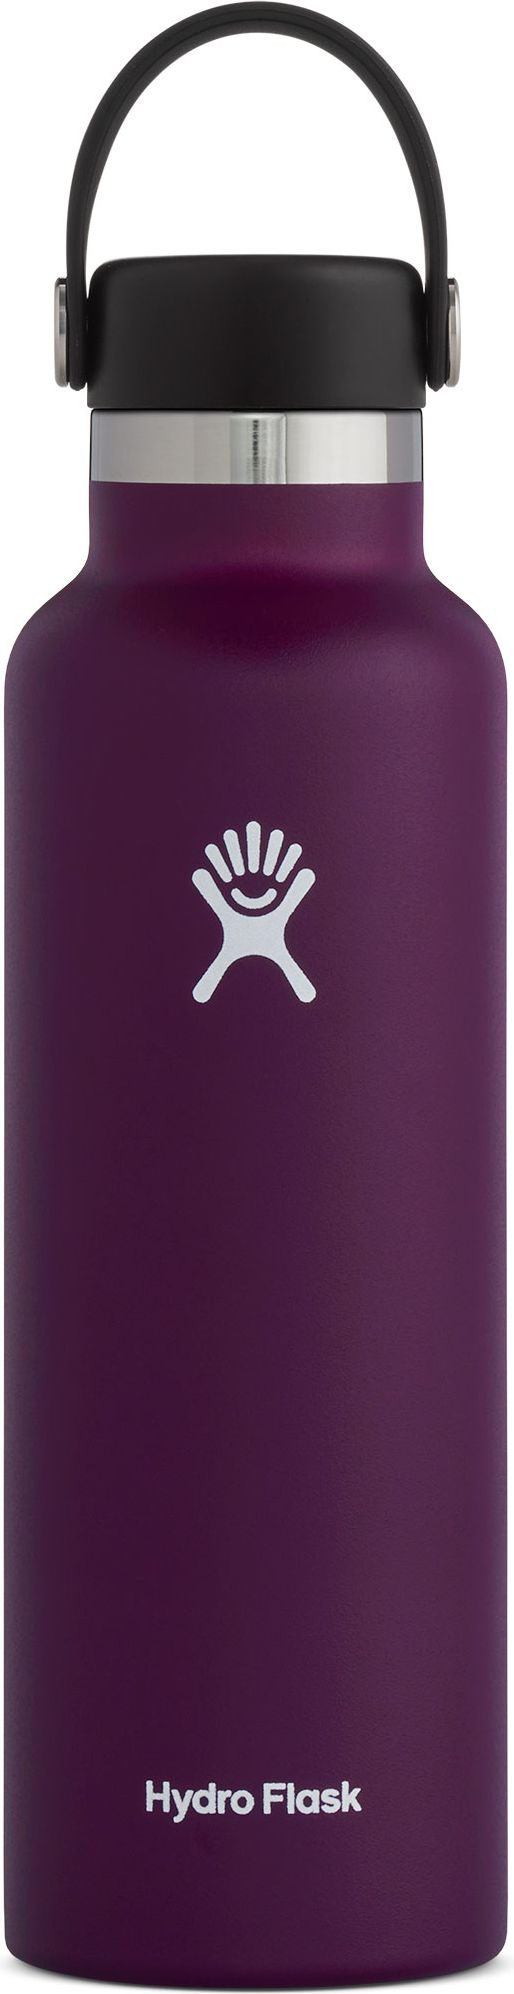 Hydro Flask Accessories 21oz Standard Mouth Eggplant